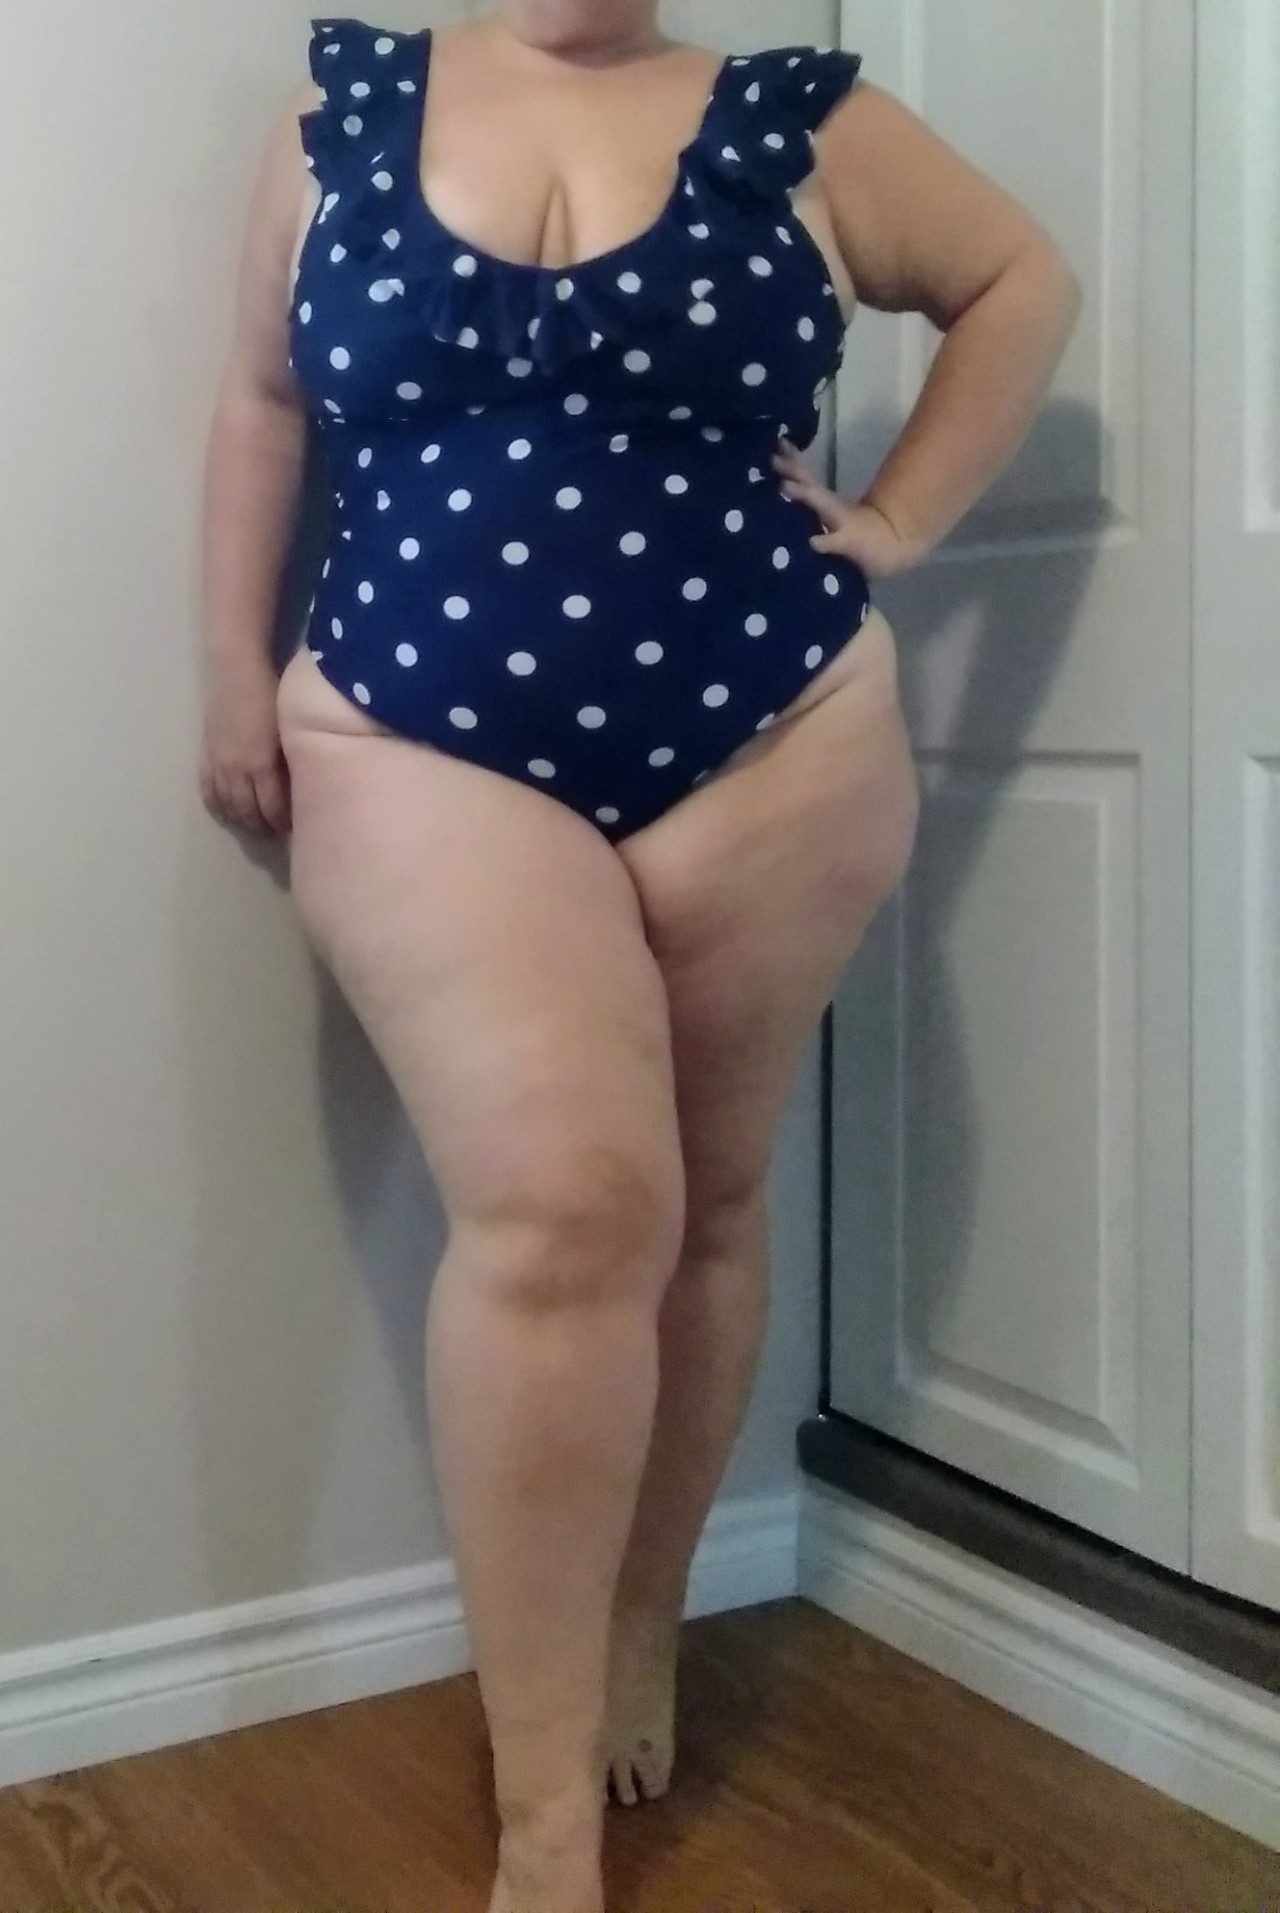 big-tits-wide-hips-deactivated2:This is my beach body in all it&rsquo;s glory,